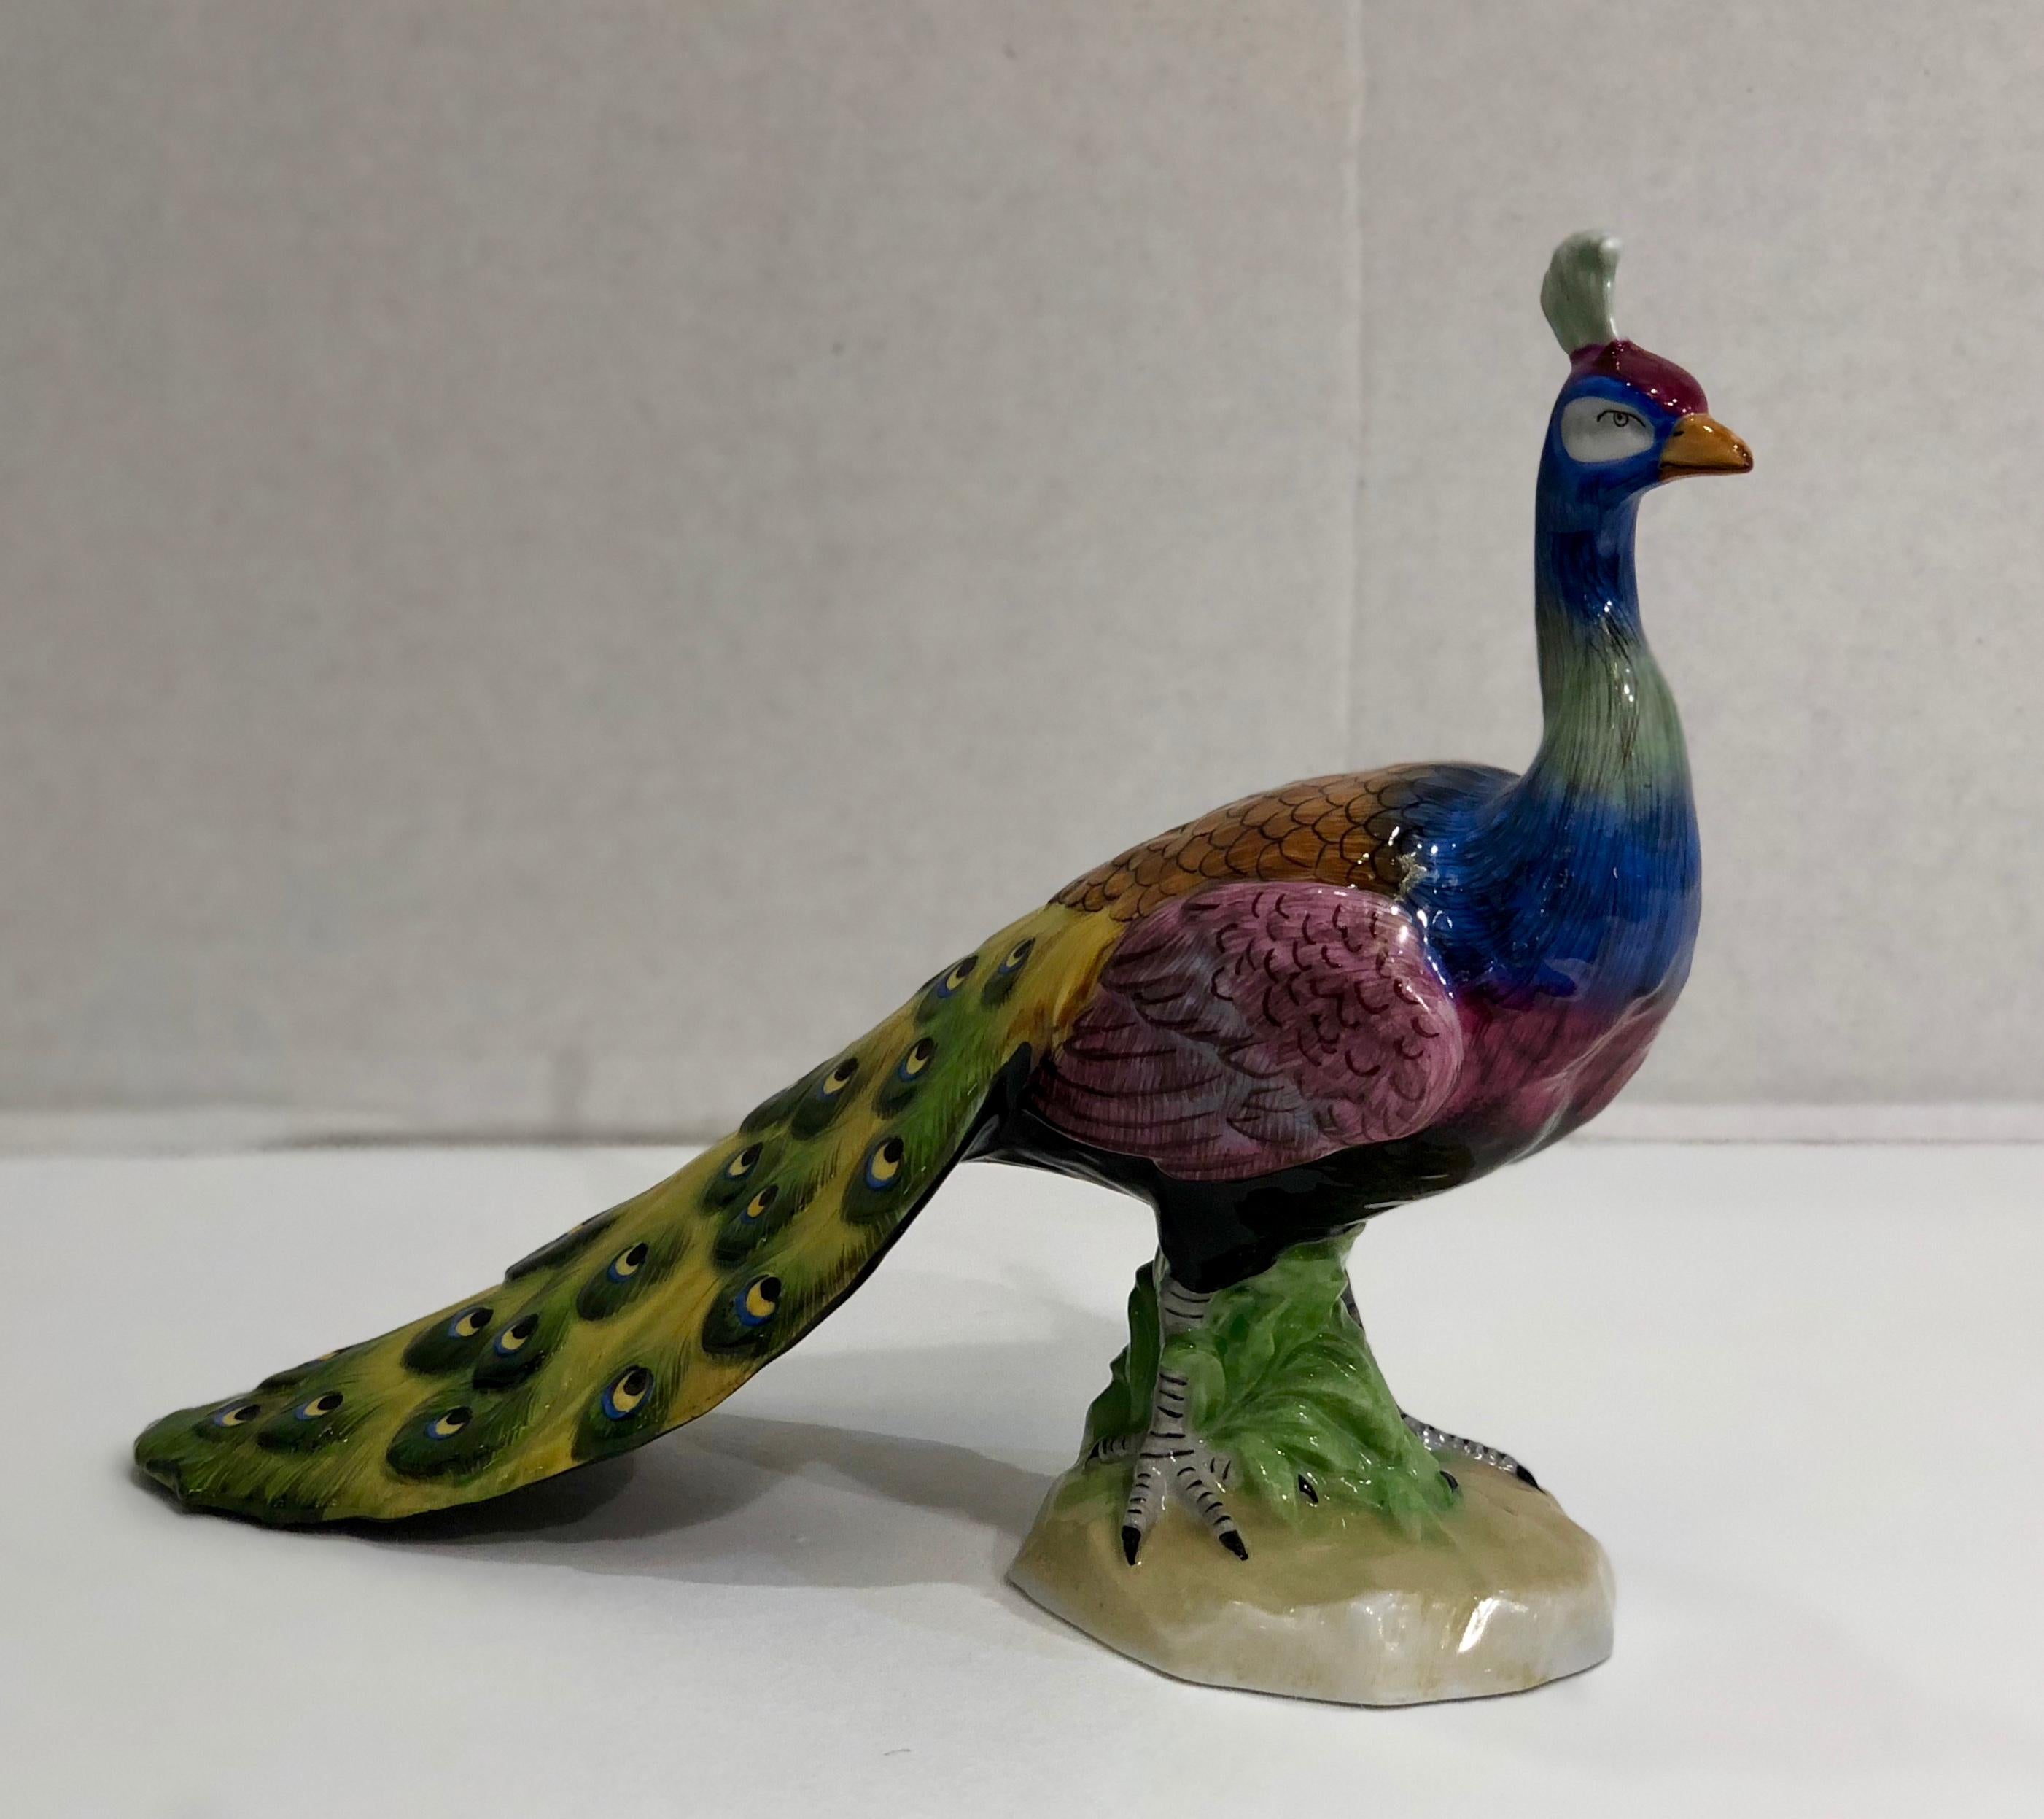 Contemporary Exquisite Dresden Porcelain Peacock Tail Closed Facing Forward Figurine Germany For Sale